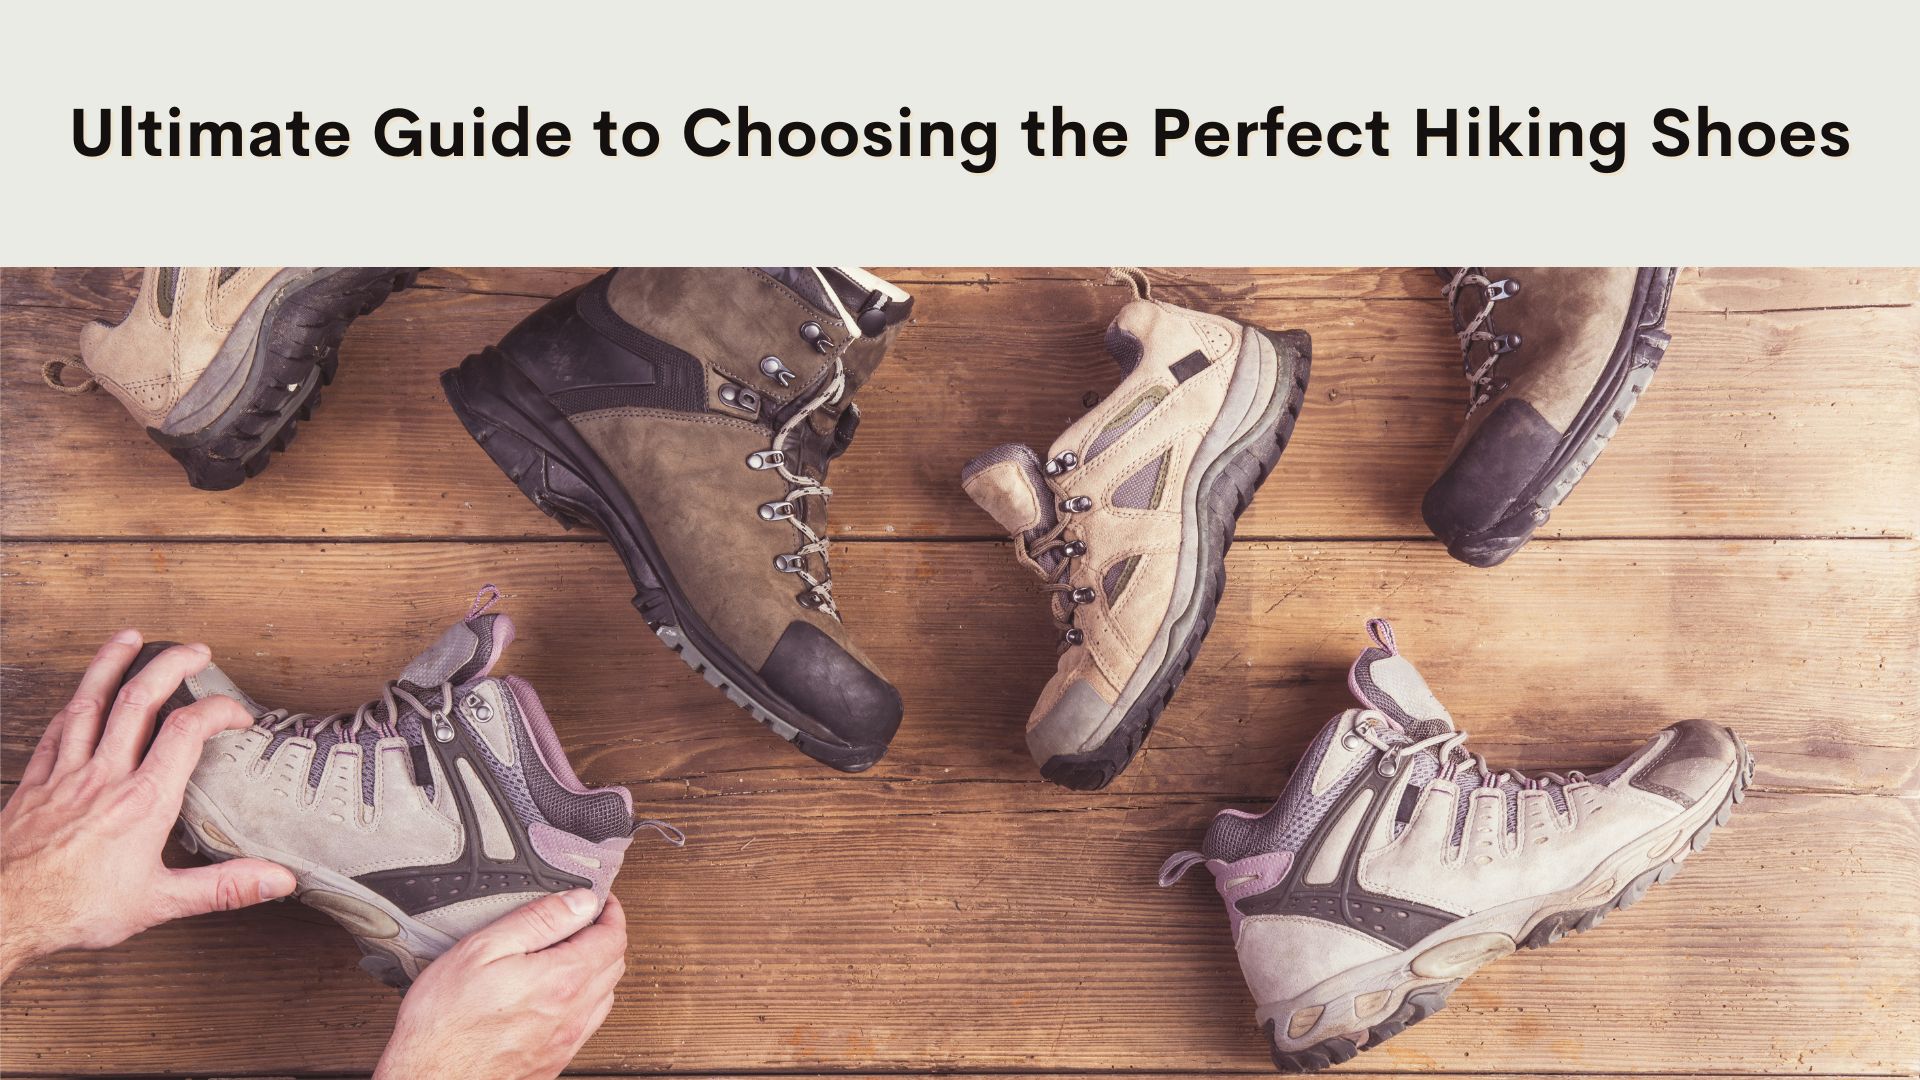 How to Pick Hiking Shoes?